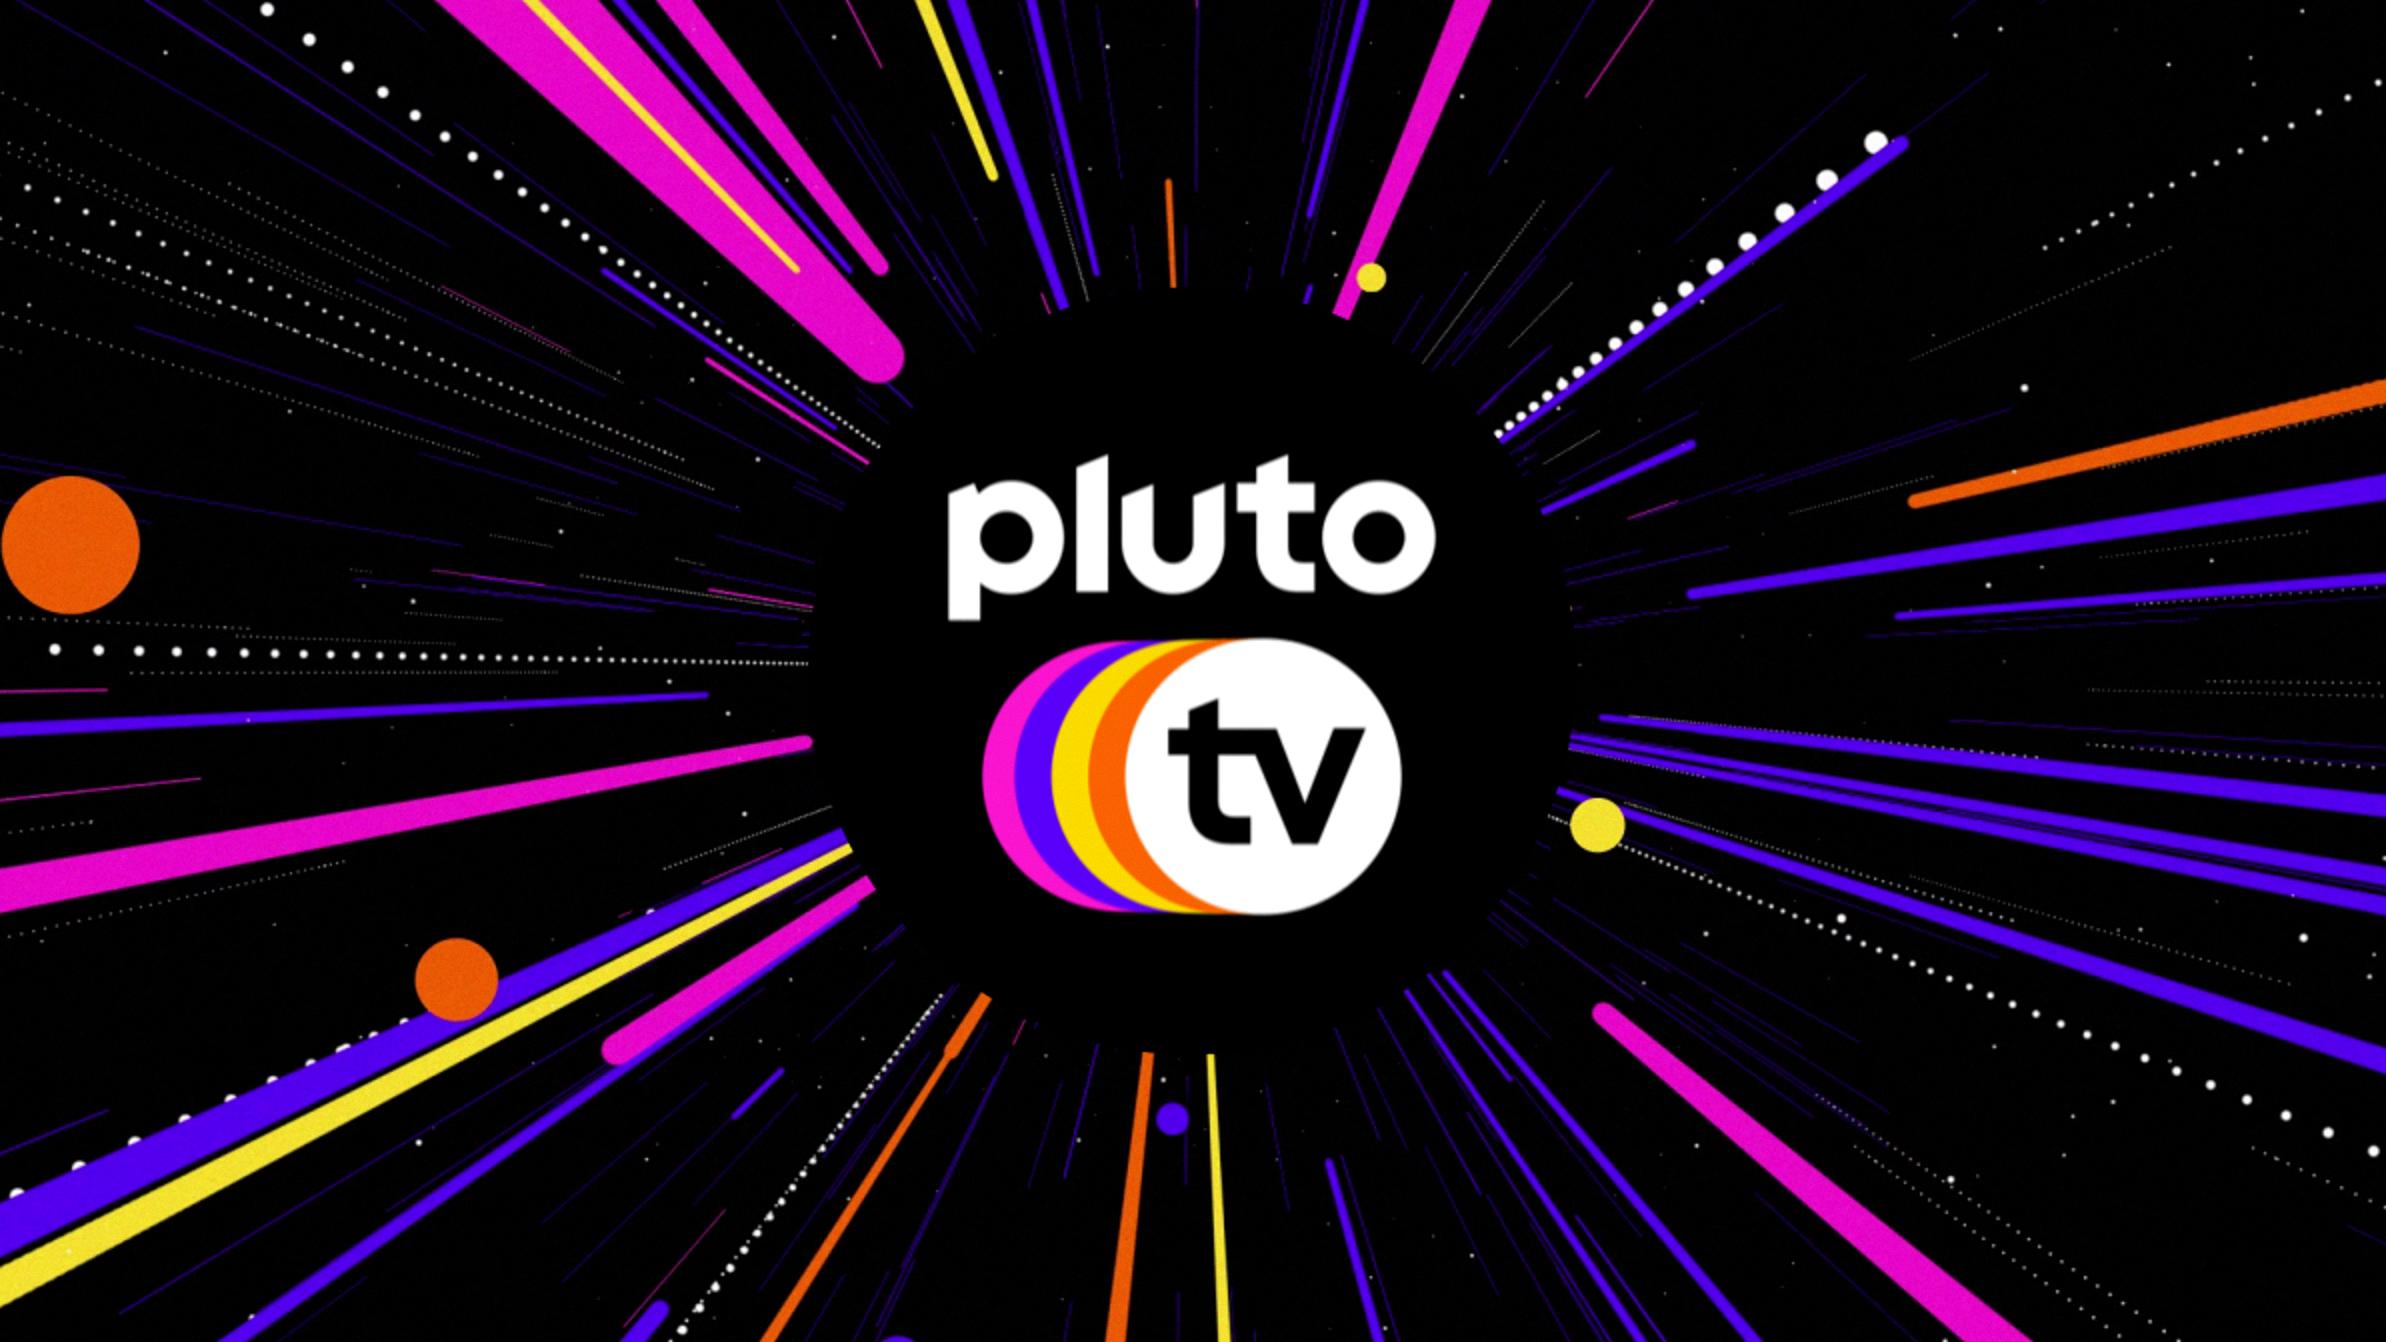 does pluto tv have commercials